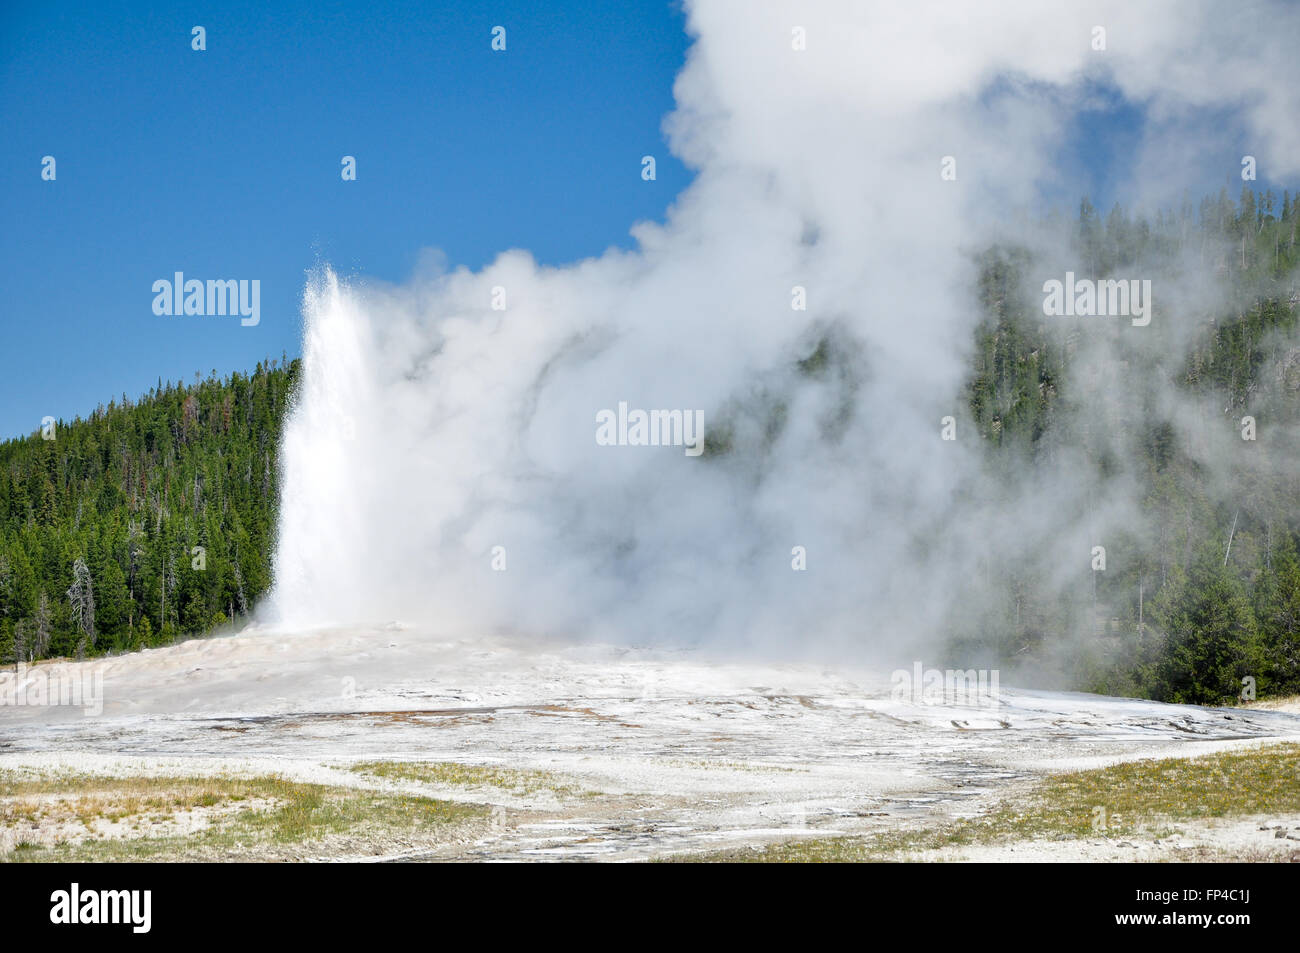 Old Faithful Geyser in Yellowstone National Park Banque D'Images